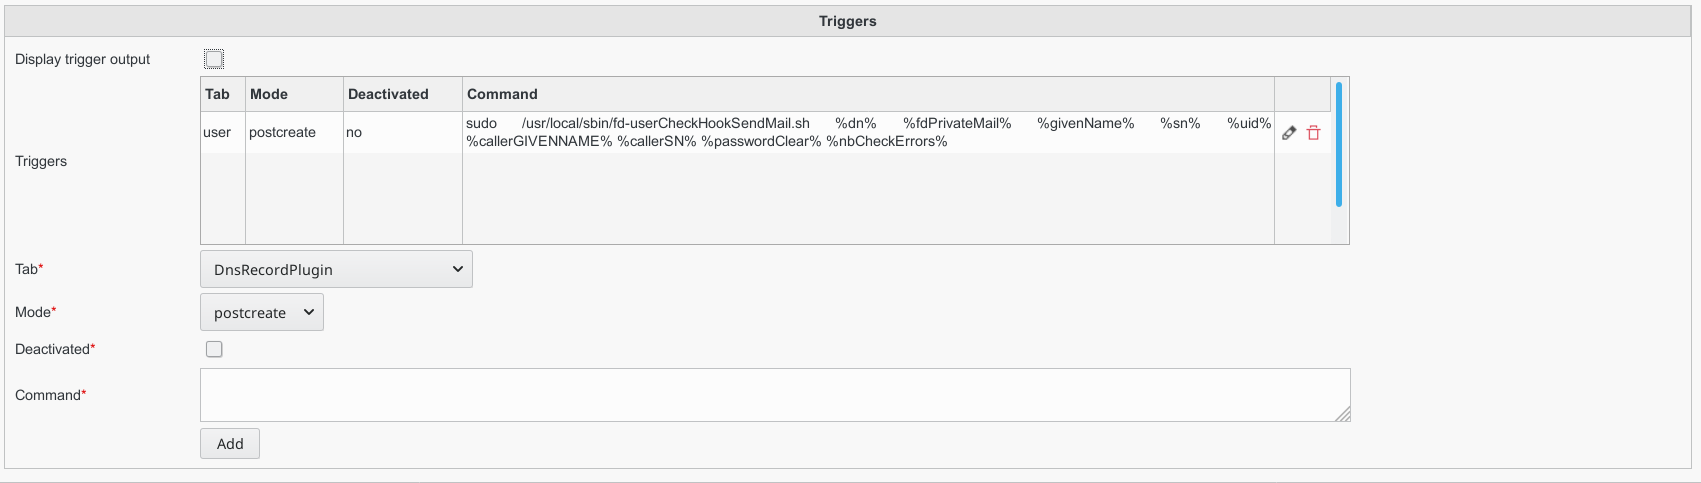 Picture of Triggers settings in FusionDirectory